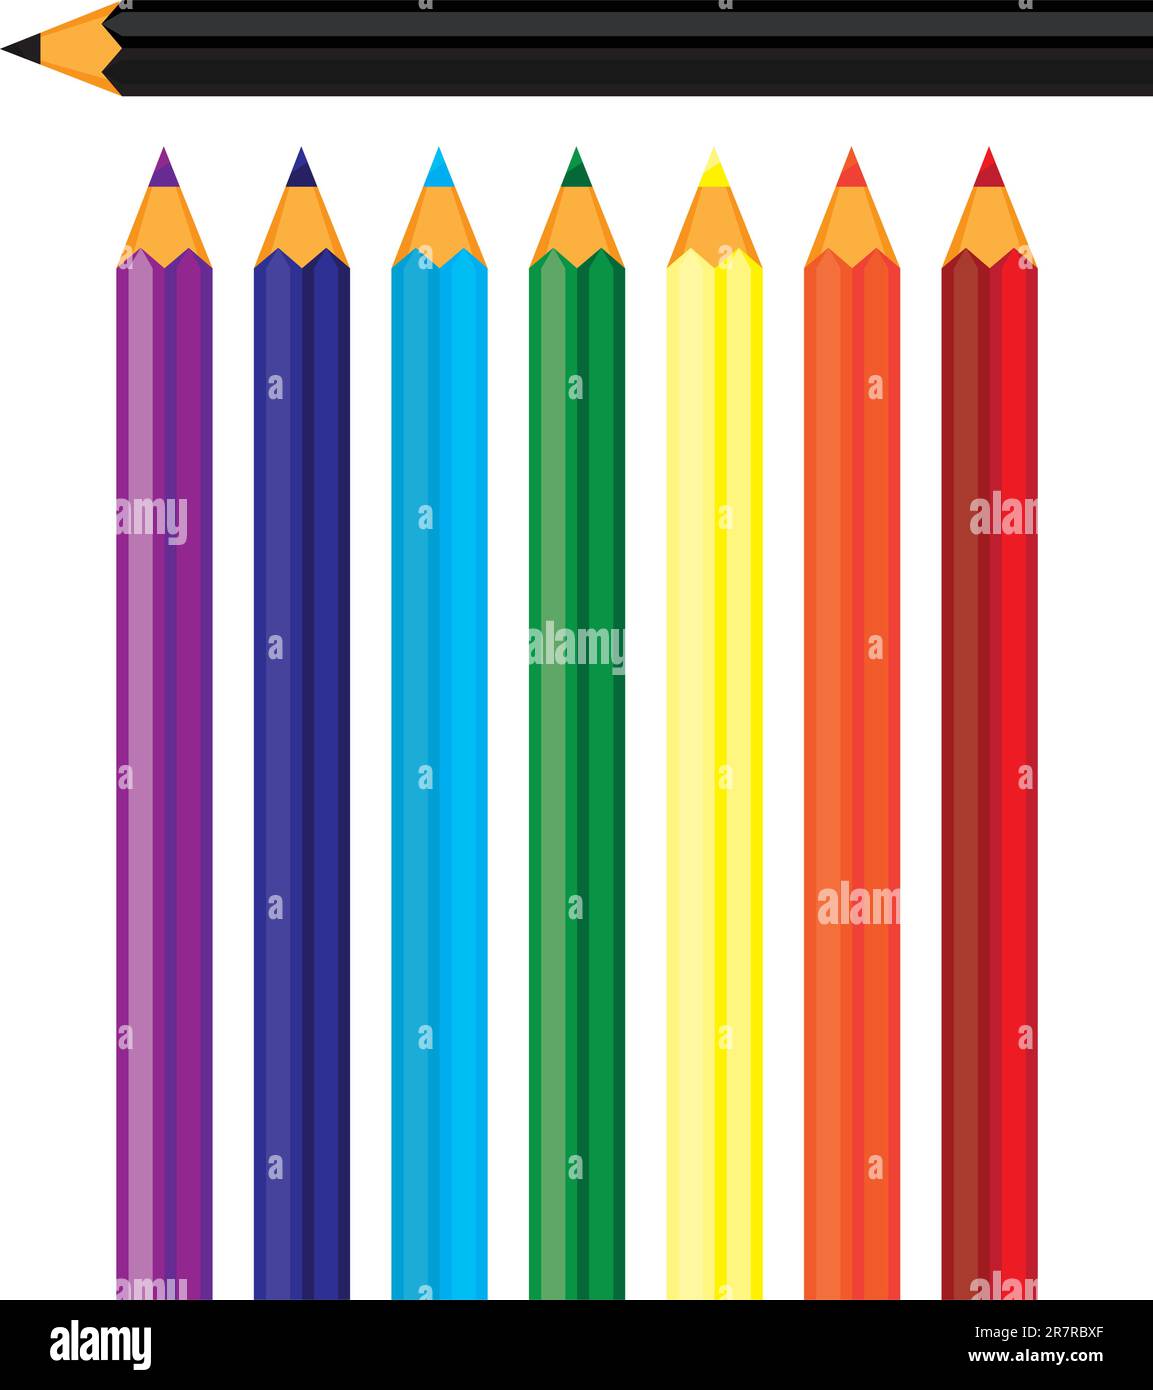 Coloured pencils.  Illustration on white background Stock Vector